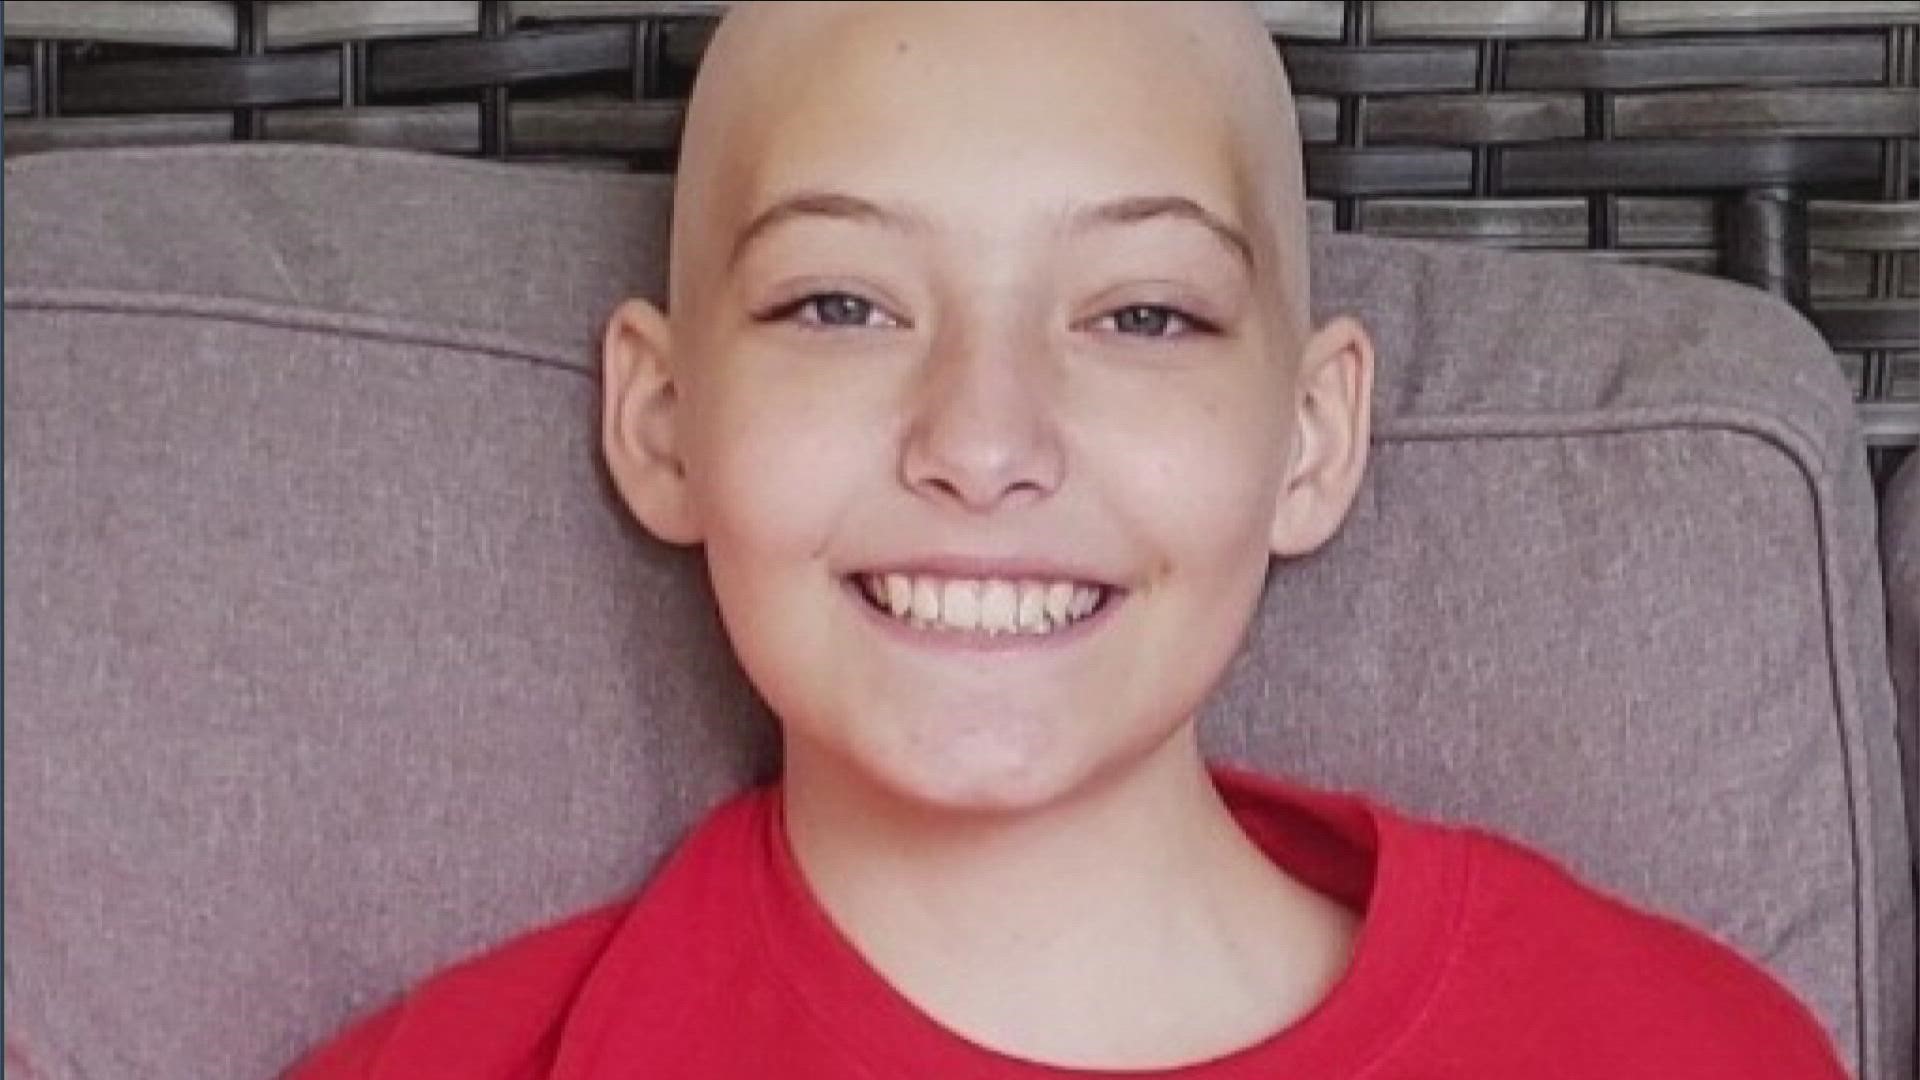 WNY rallies to support 12YO fighting cancer